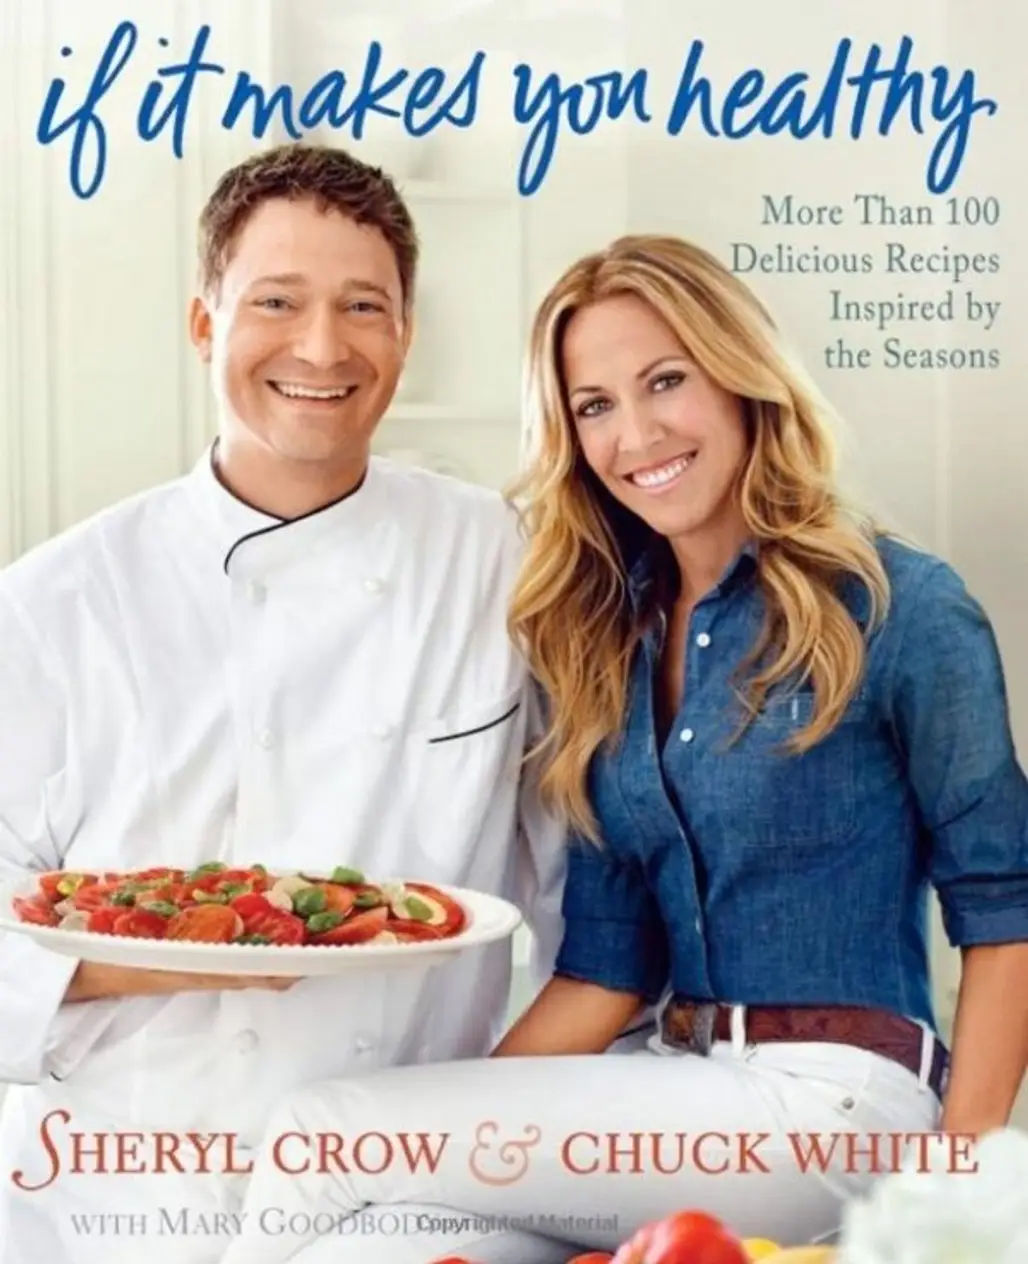 ‘if It Makes You Healthy: More than 100 Delicious Recipes Inspired by the Seasons’ by Sheryl Crow